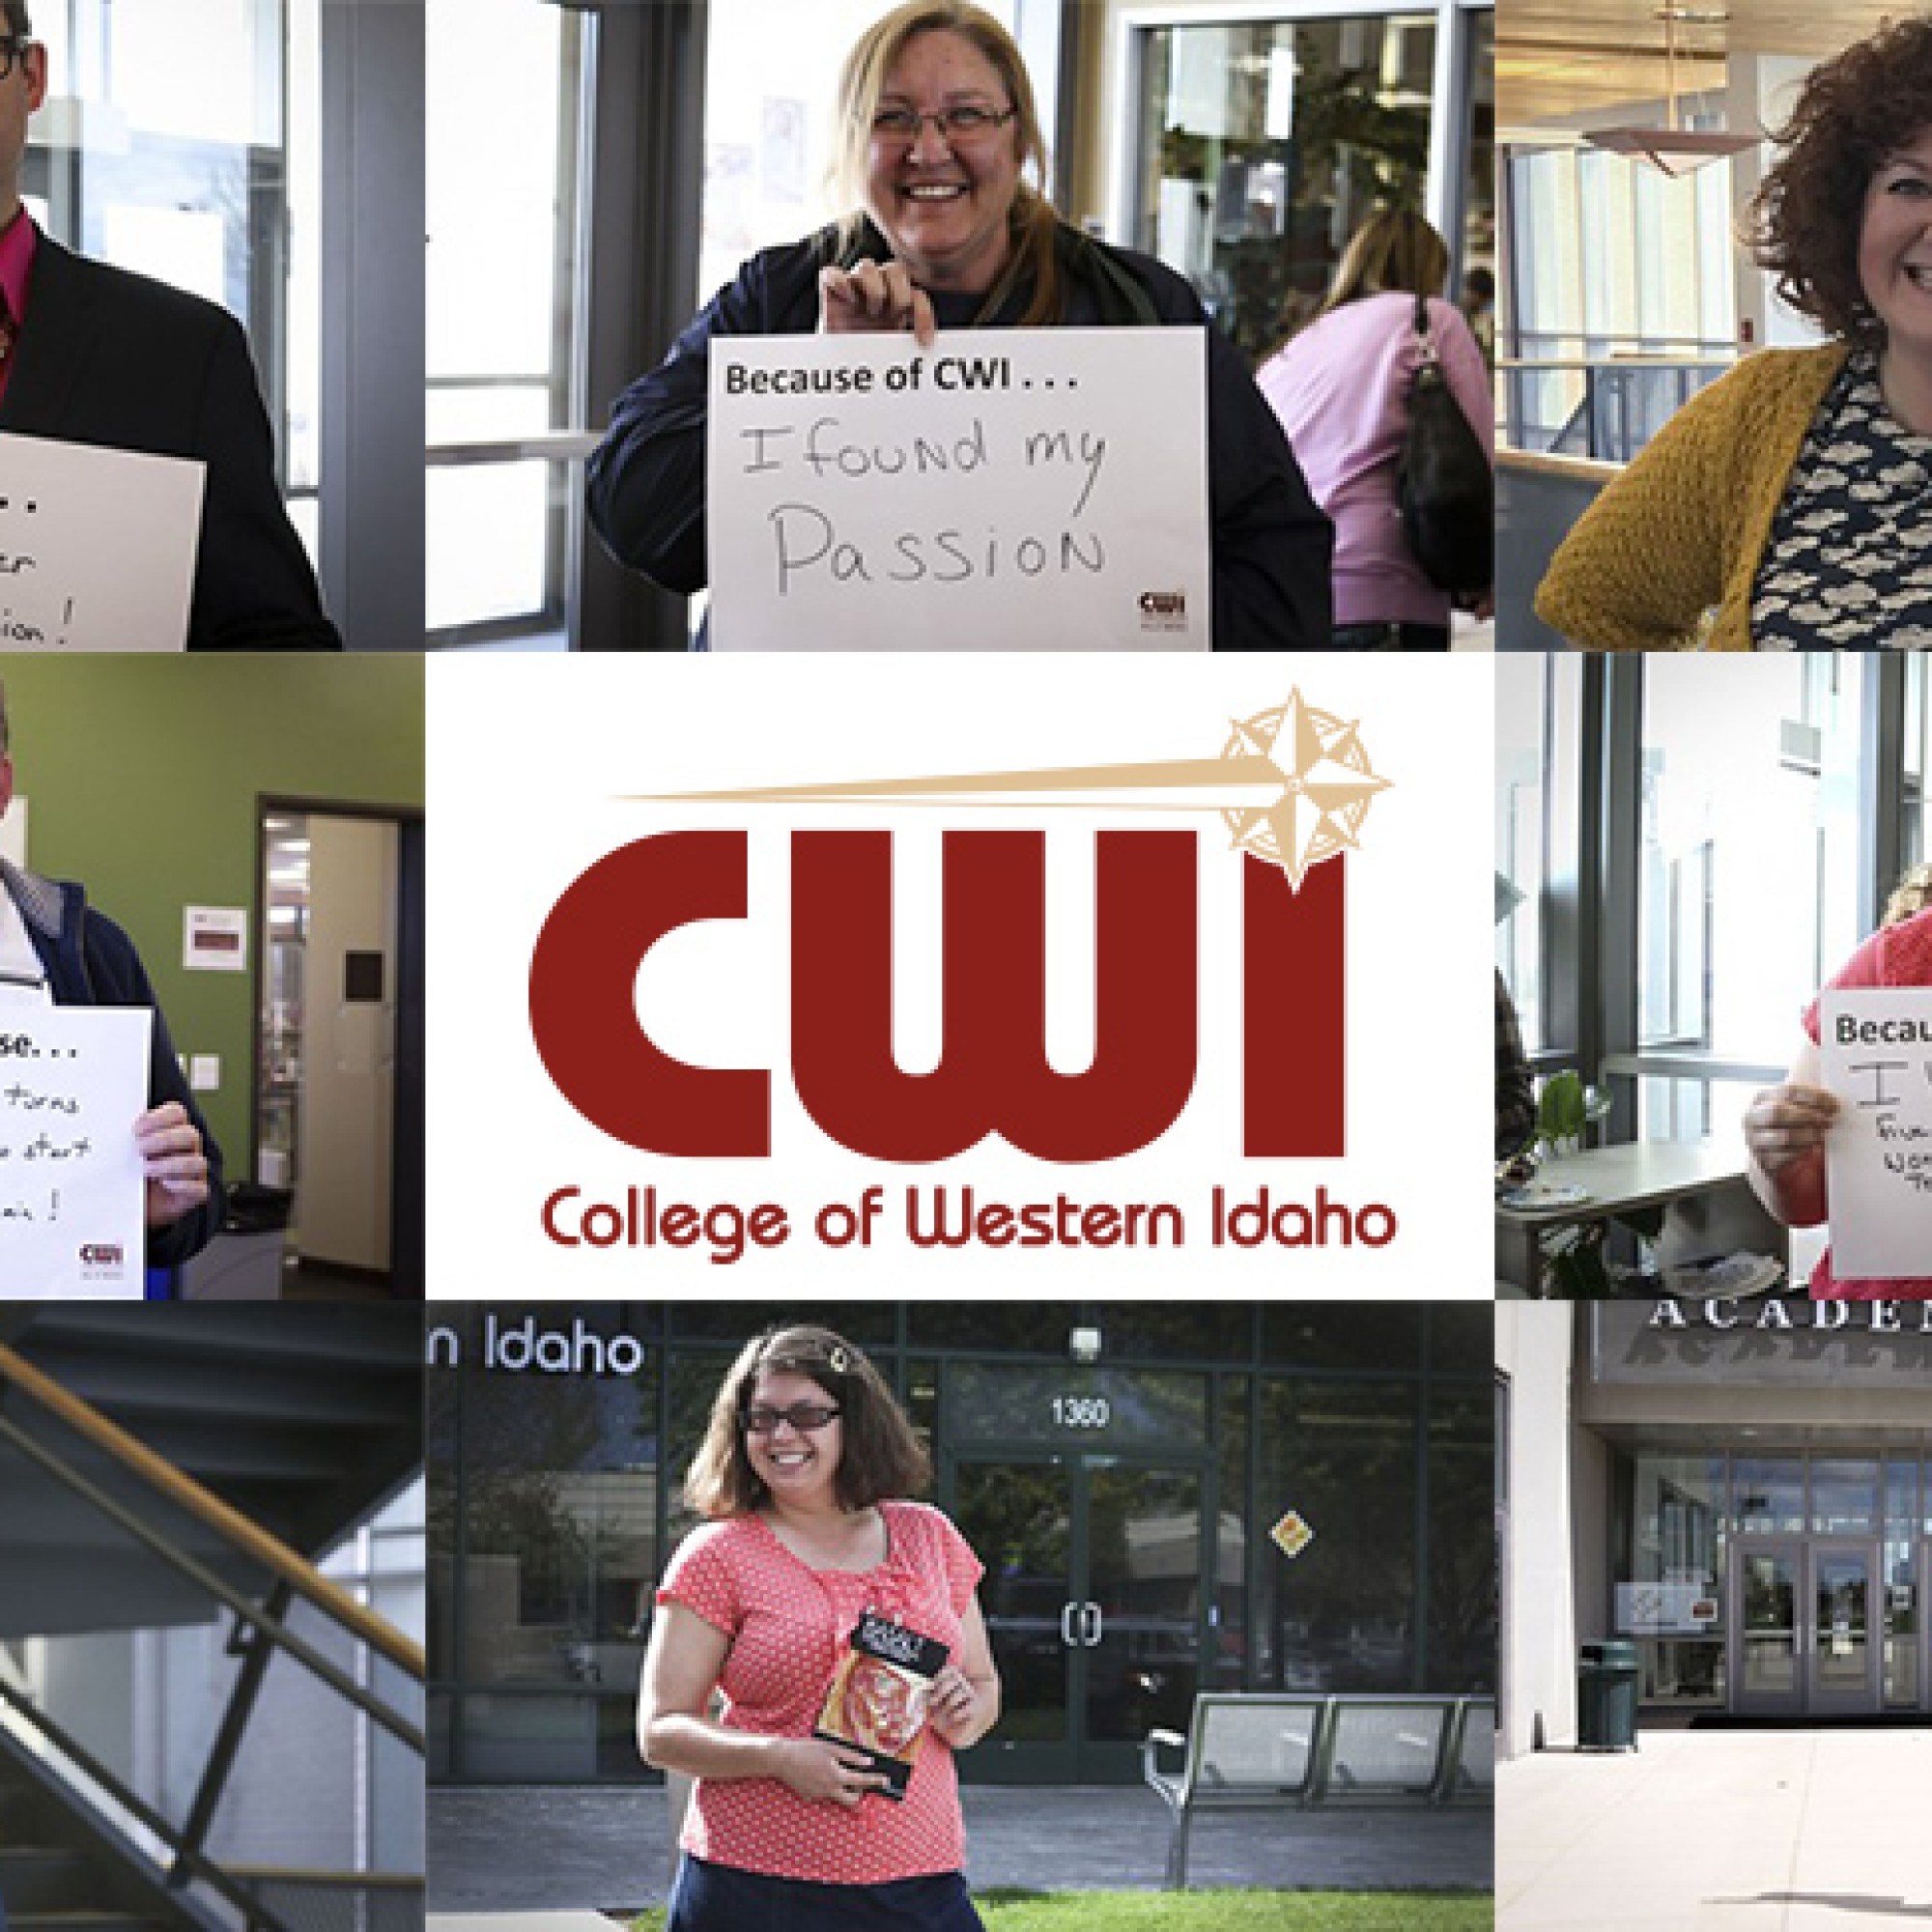 Collage of students with Because of CWI signs with personal messages